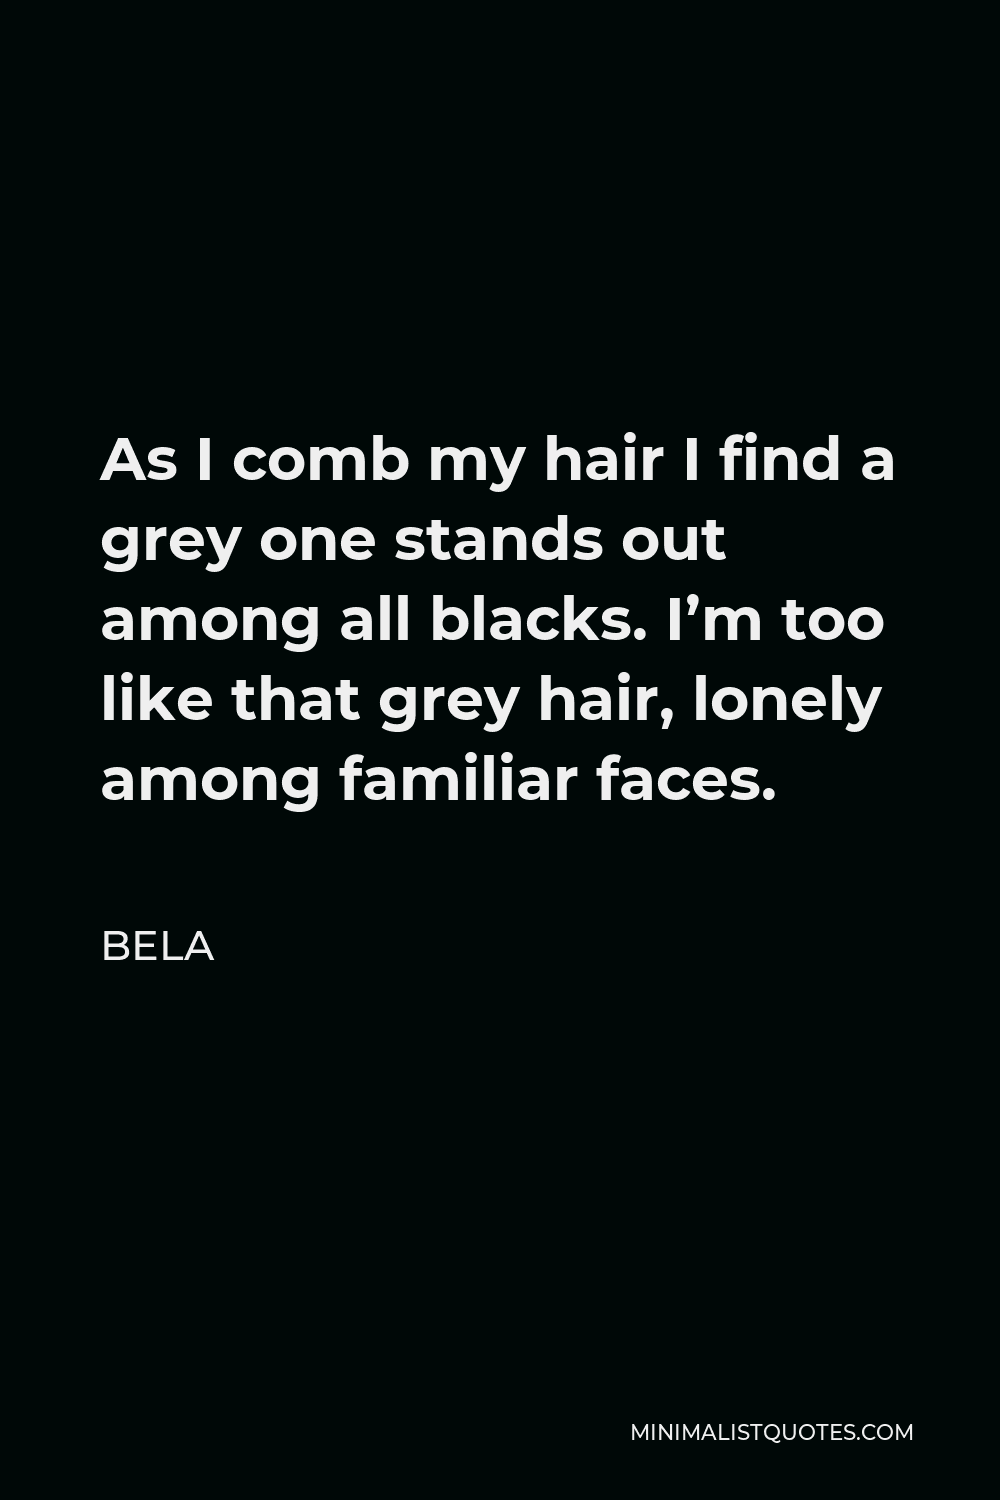 Bela Quote - As I comb my hair I find a grey one stands out among all blacks. I’m too like that grey hair, lonely among familiar faces.